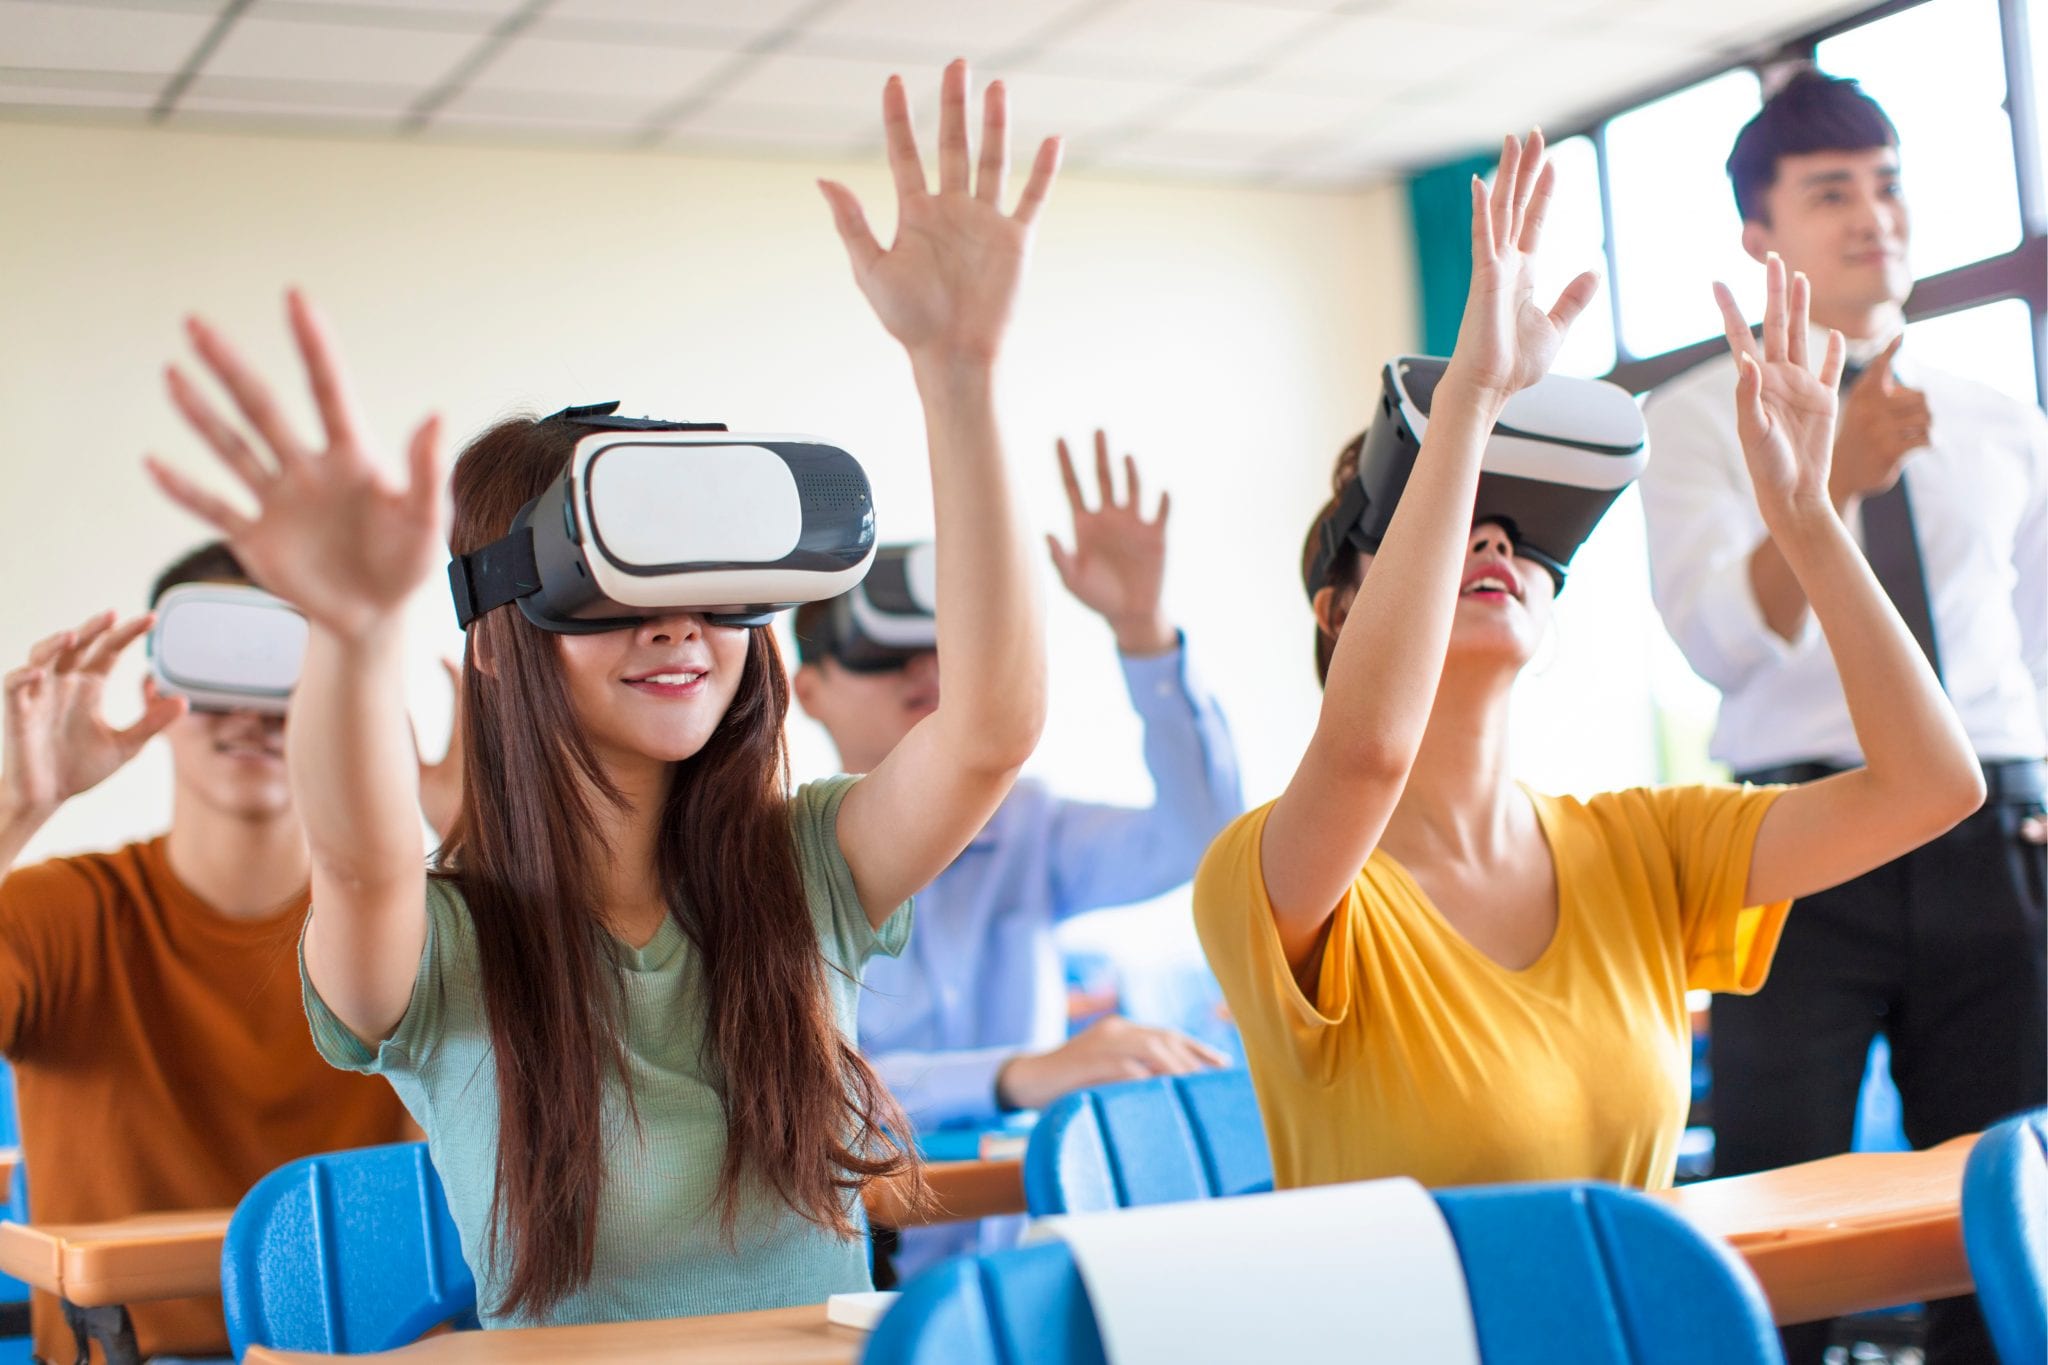 University students using VR in classroom